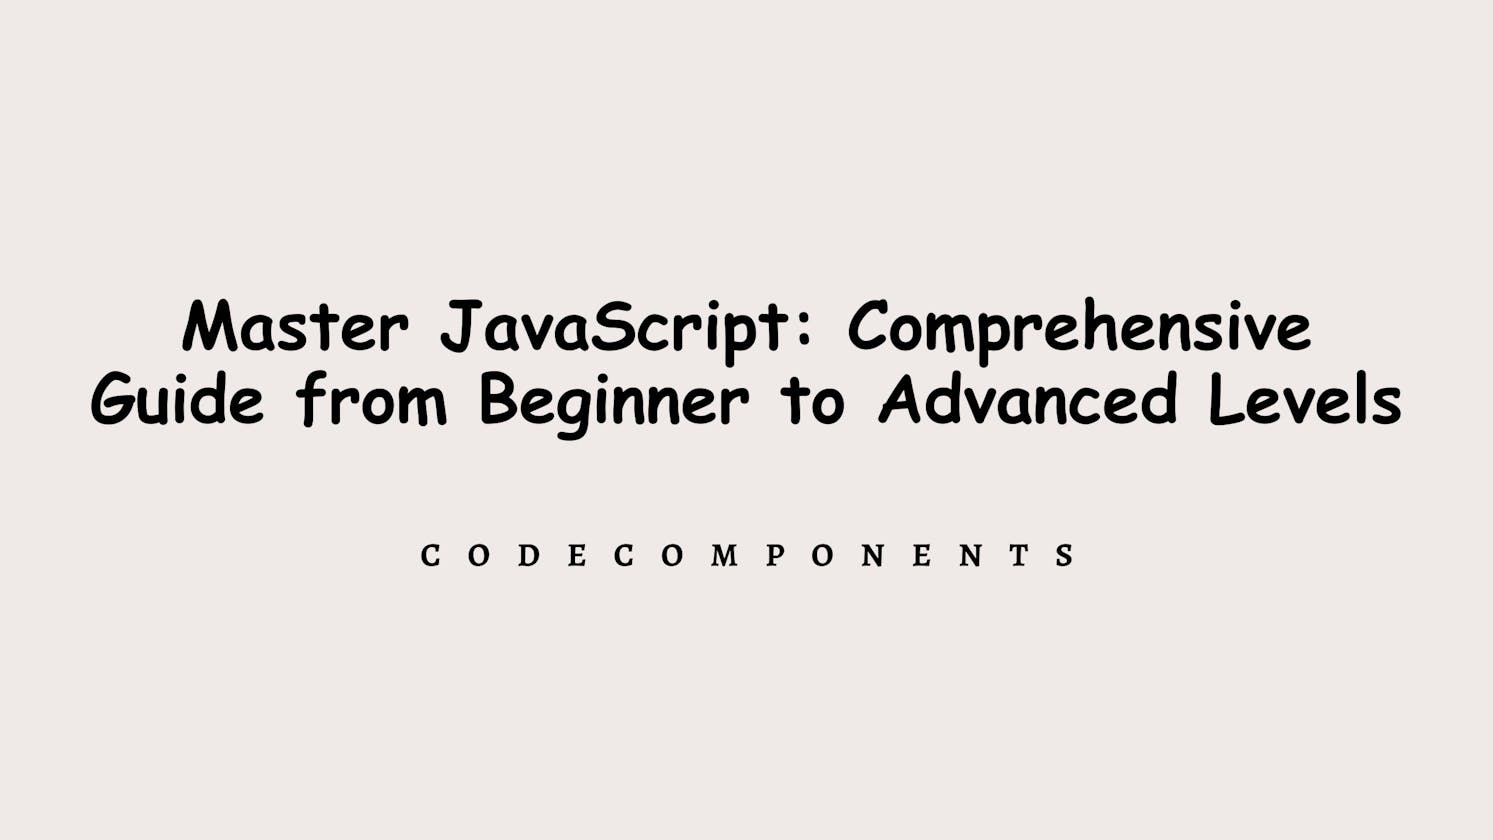 Master JavaScript: A Comprehensive Guide from Beginner to Advanced Levels